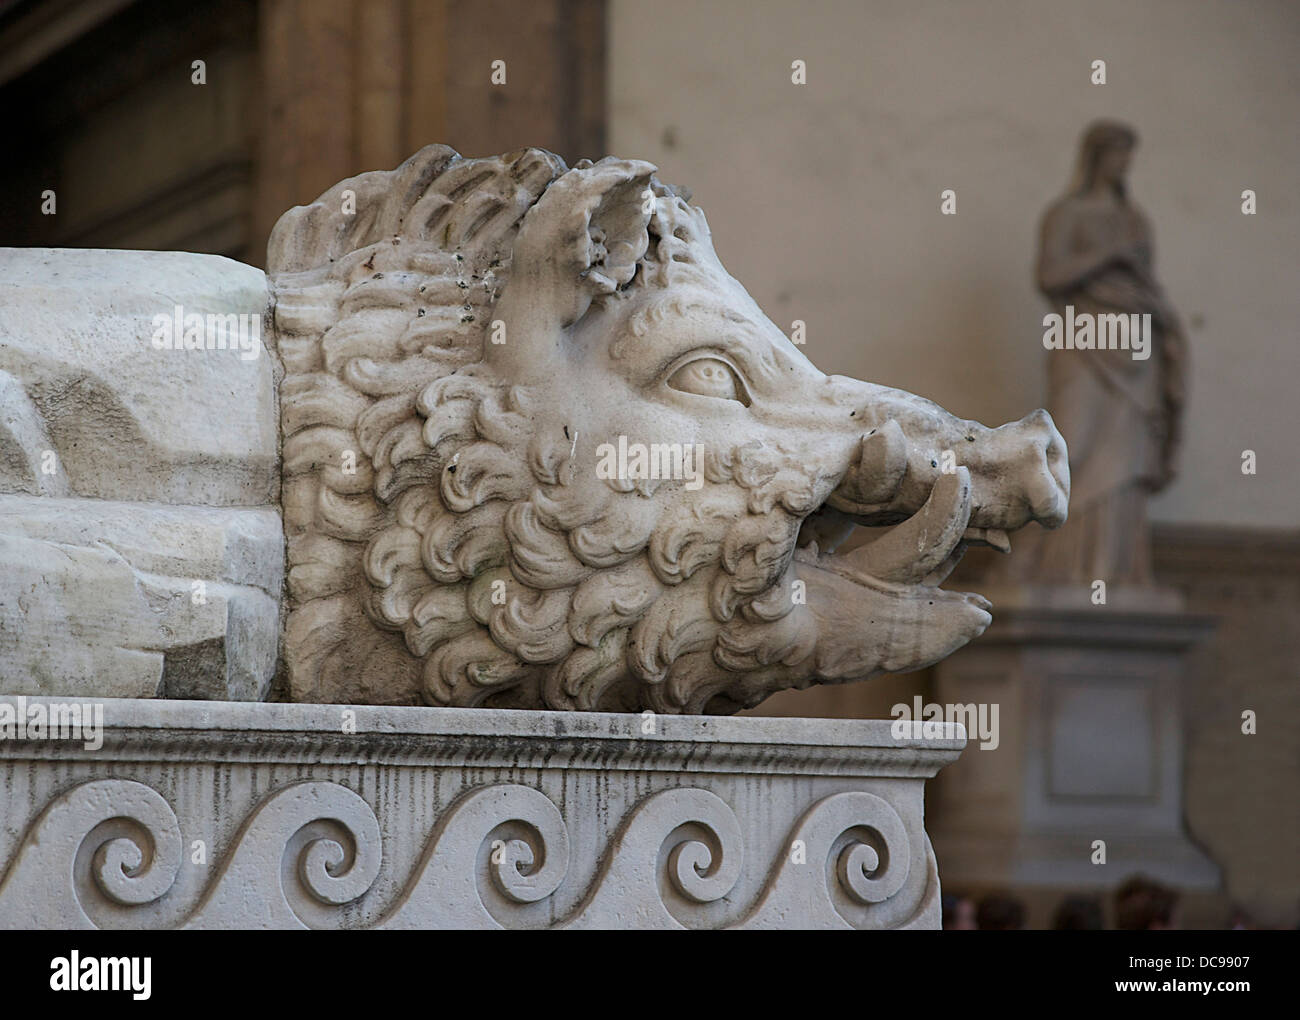 Boar head, statue of Heracles and Cacus by Bandinelli, Piazza della Signoria in front of Palazzo Vecchio, Florence, Italy. Stock Photo